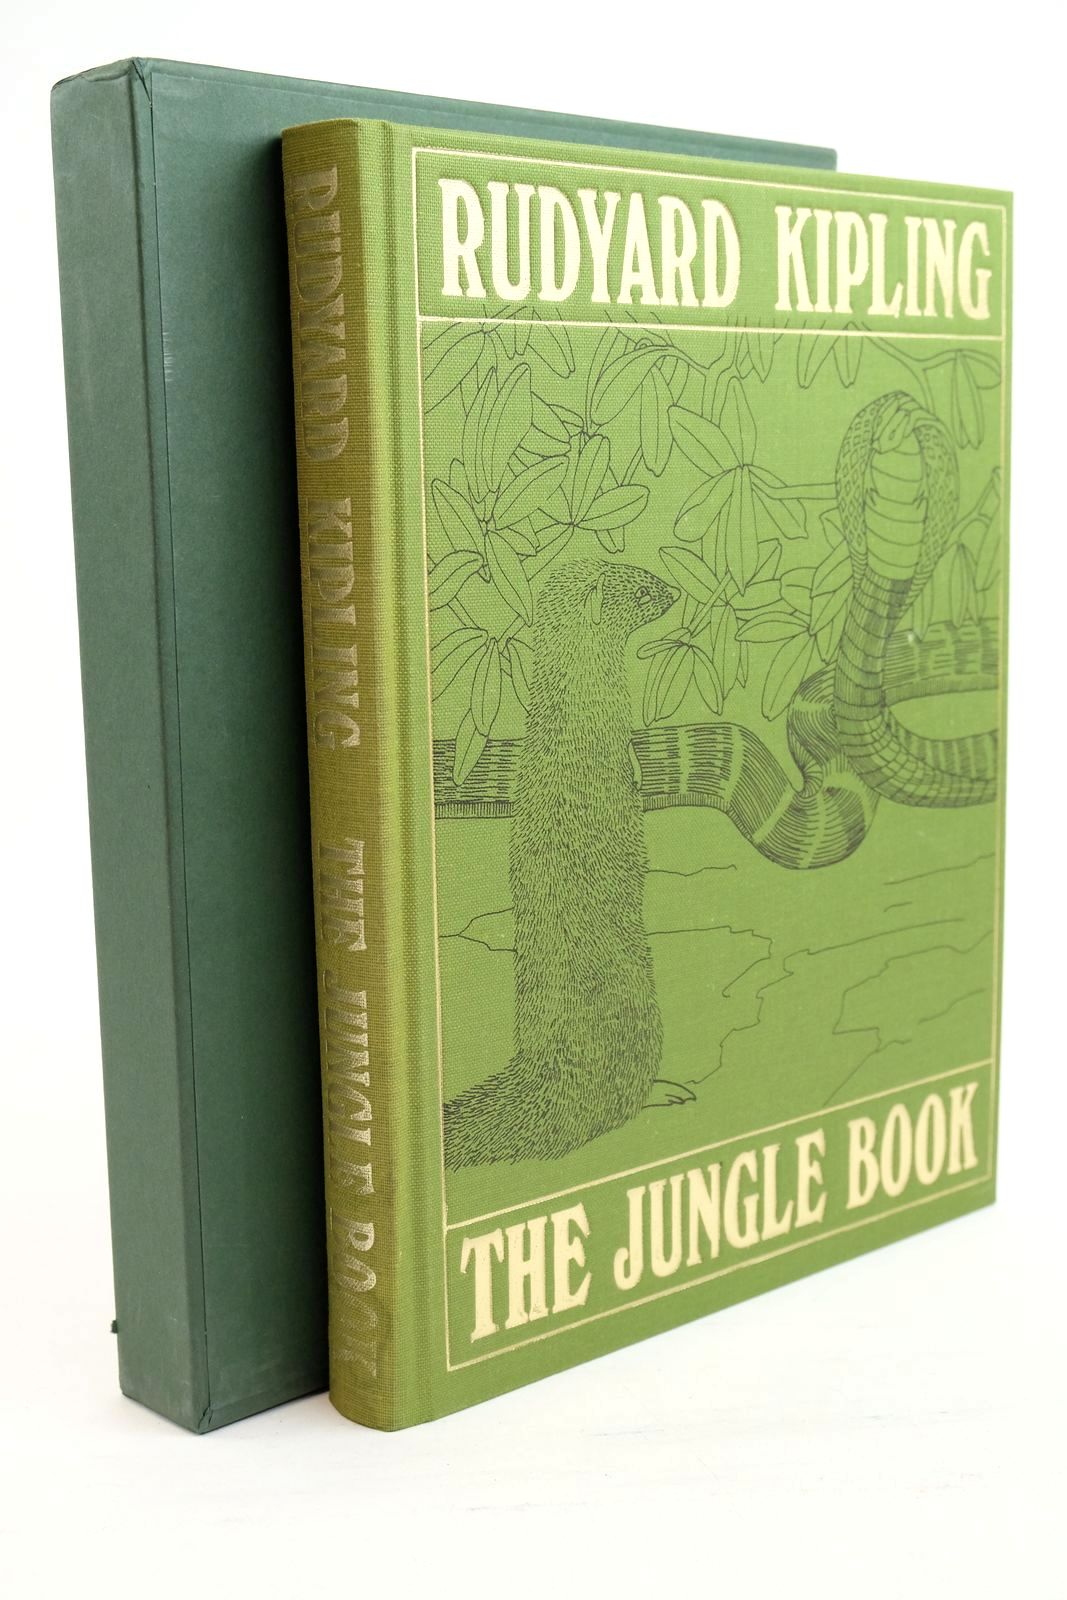 Photo of THE JUNGLE BOOK written by Kipling, Rudyard illustrated by Detmold, Maurice Detmold, Edward J. published by Folio Society (STOCK CODE: 1320915)  for sale by Stella & Rose's Books